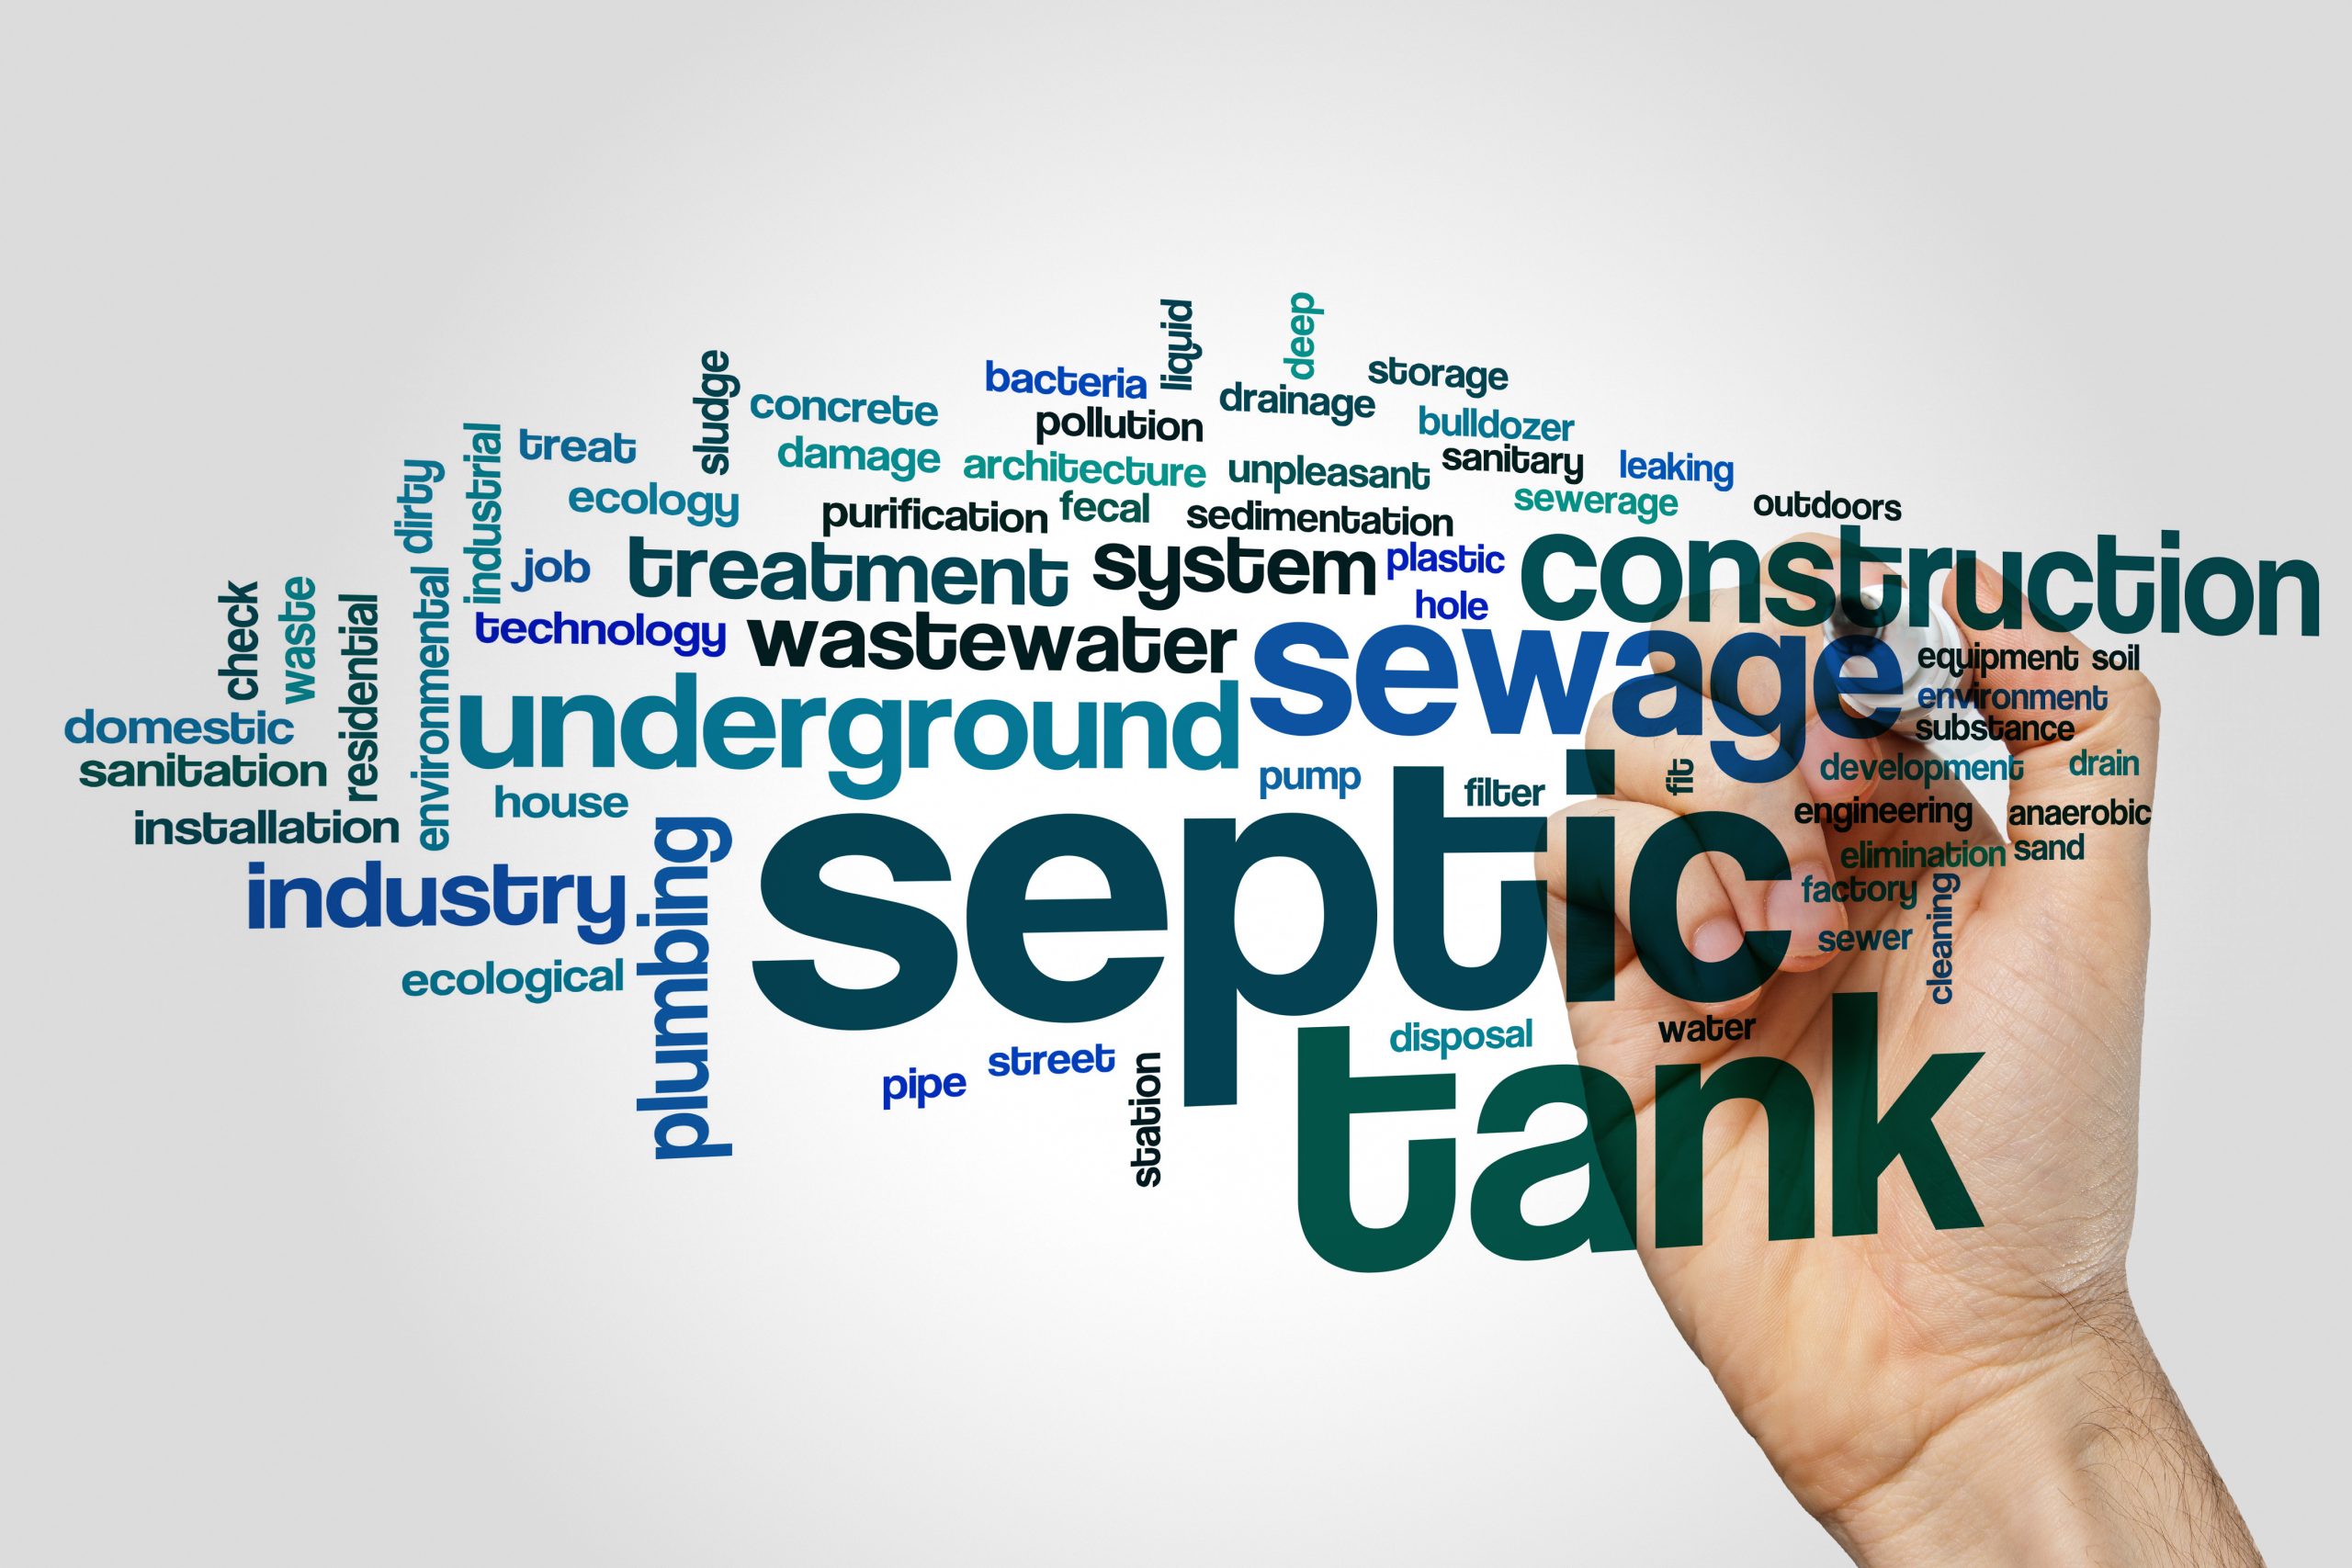 Septic Tank Words